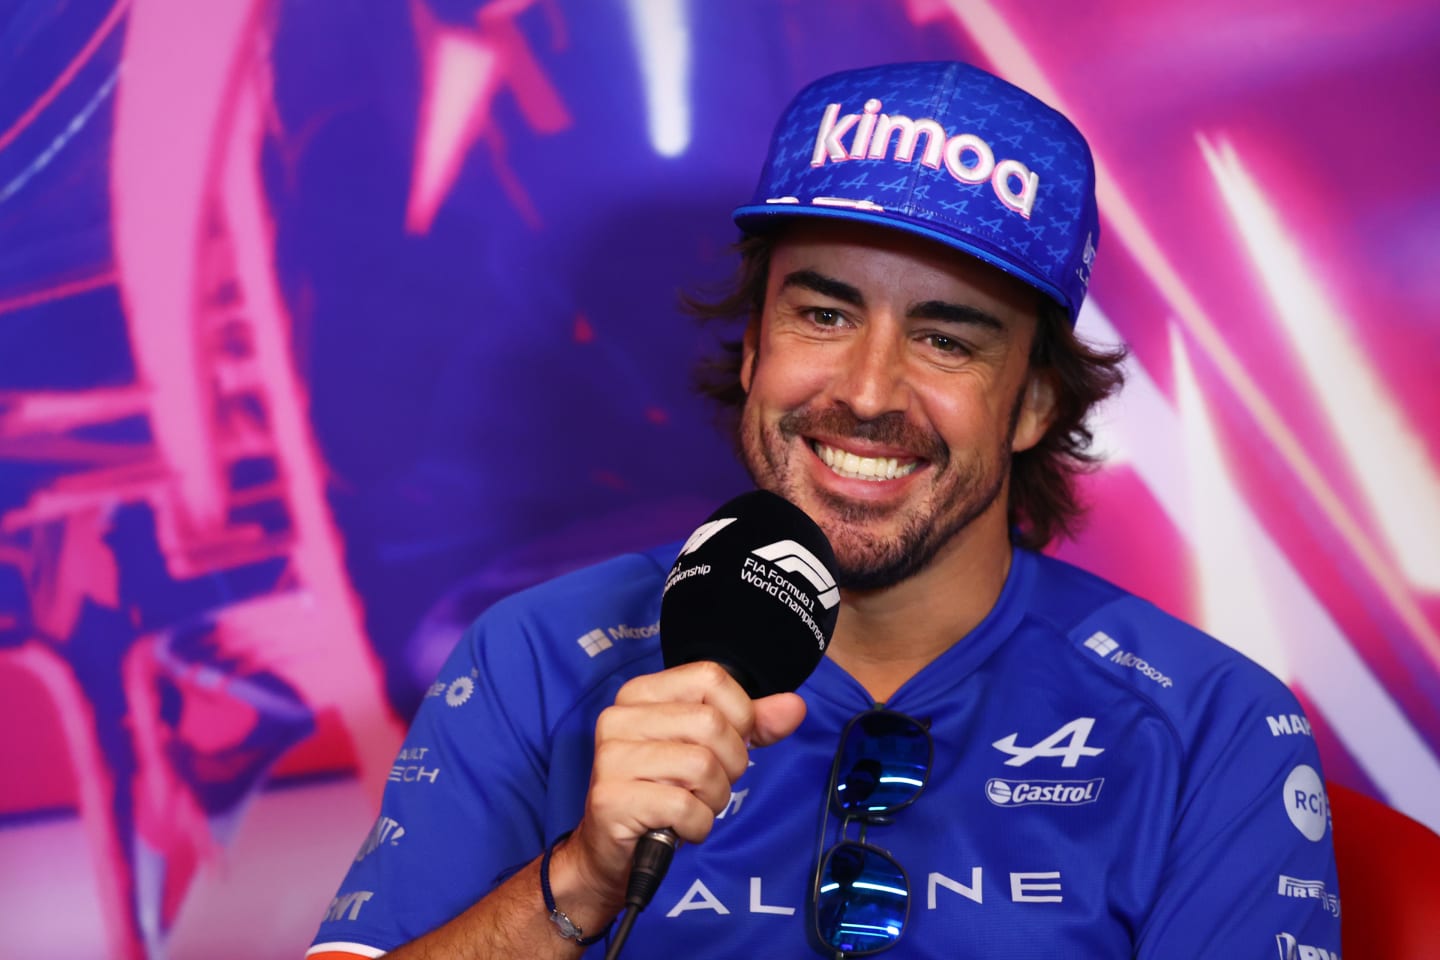 MONTREAL, QUEBEC - JUNE 17: Fernando Alonso of Spain and Alpine F1 talks in the Drivers Press Conference prior to practice ahead of the F1 Grand Prix of Canada at Circuit Gilles Villeneuve on June 17, 2022 in Montreal, Quebec. (Photo by Dan Istitene/Getty Images)